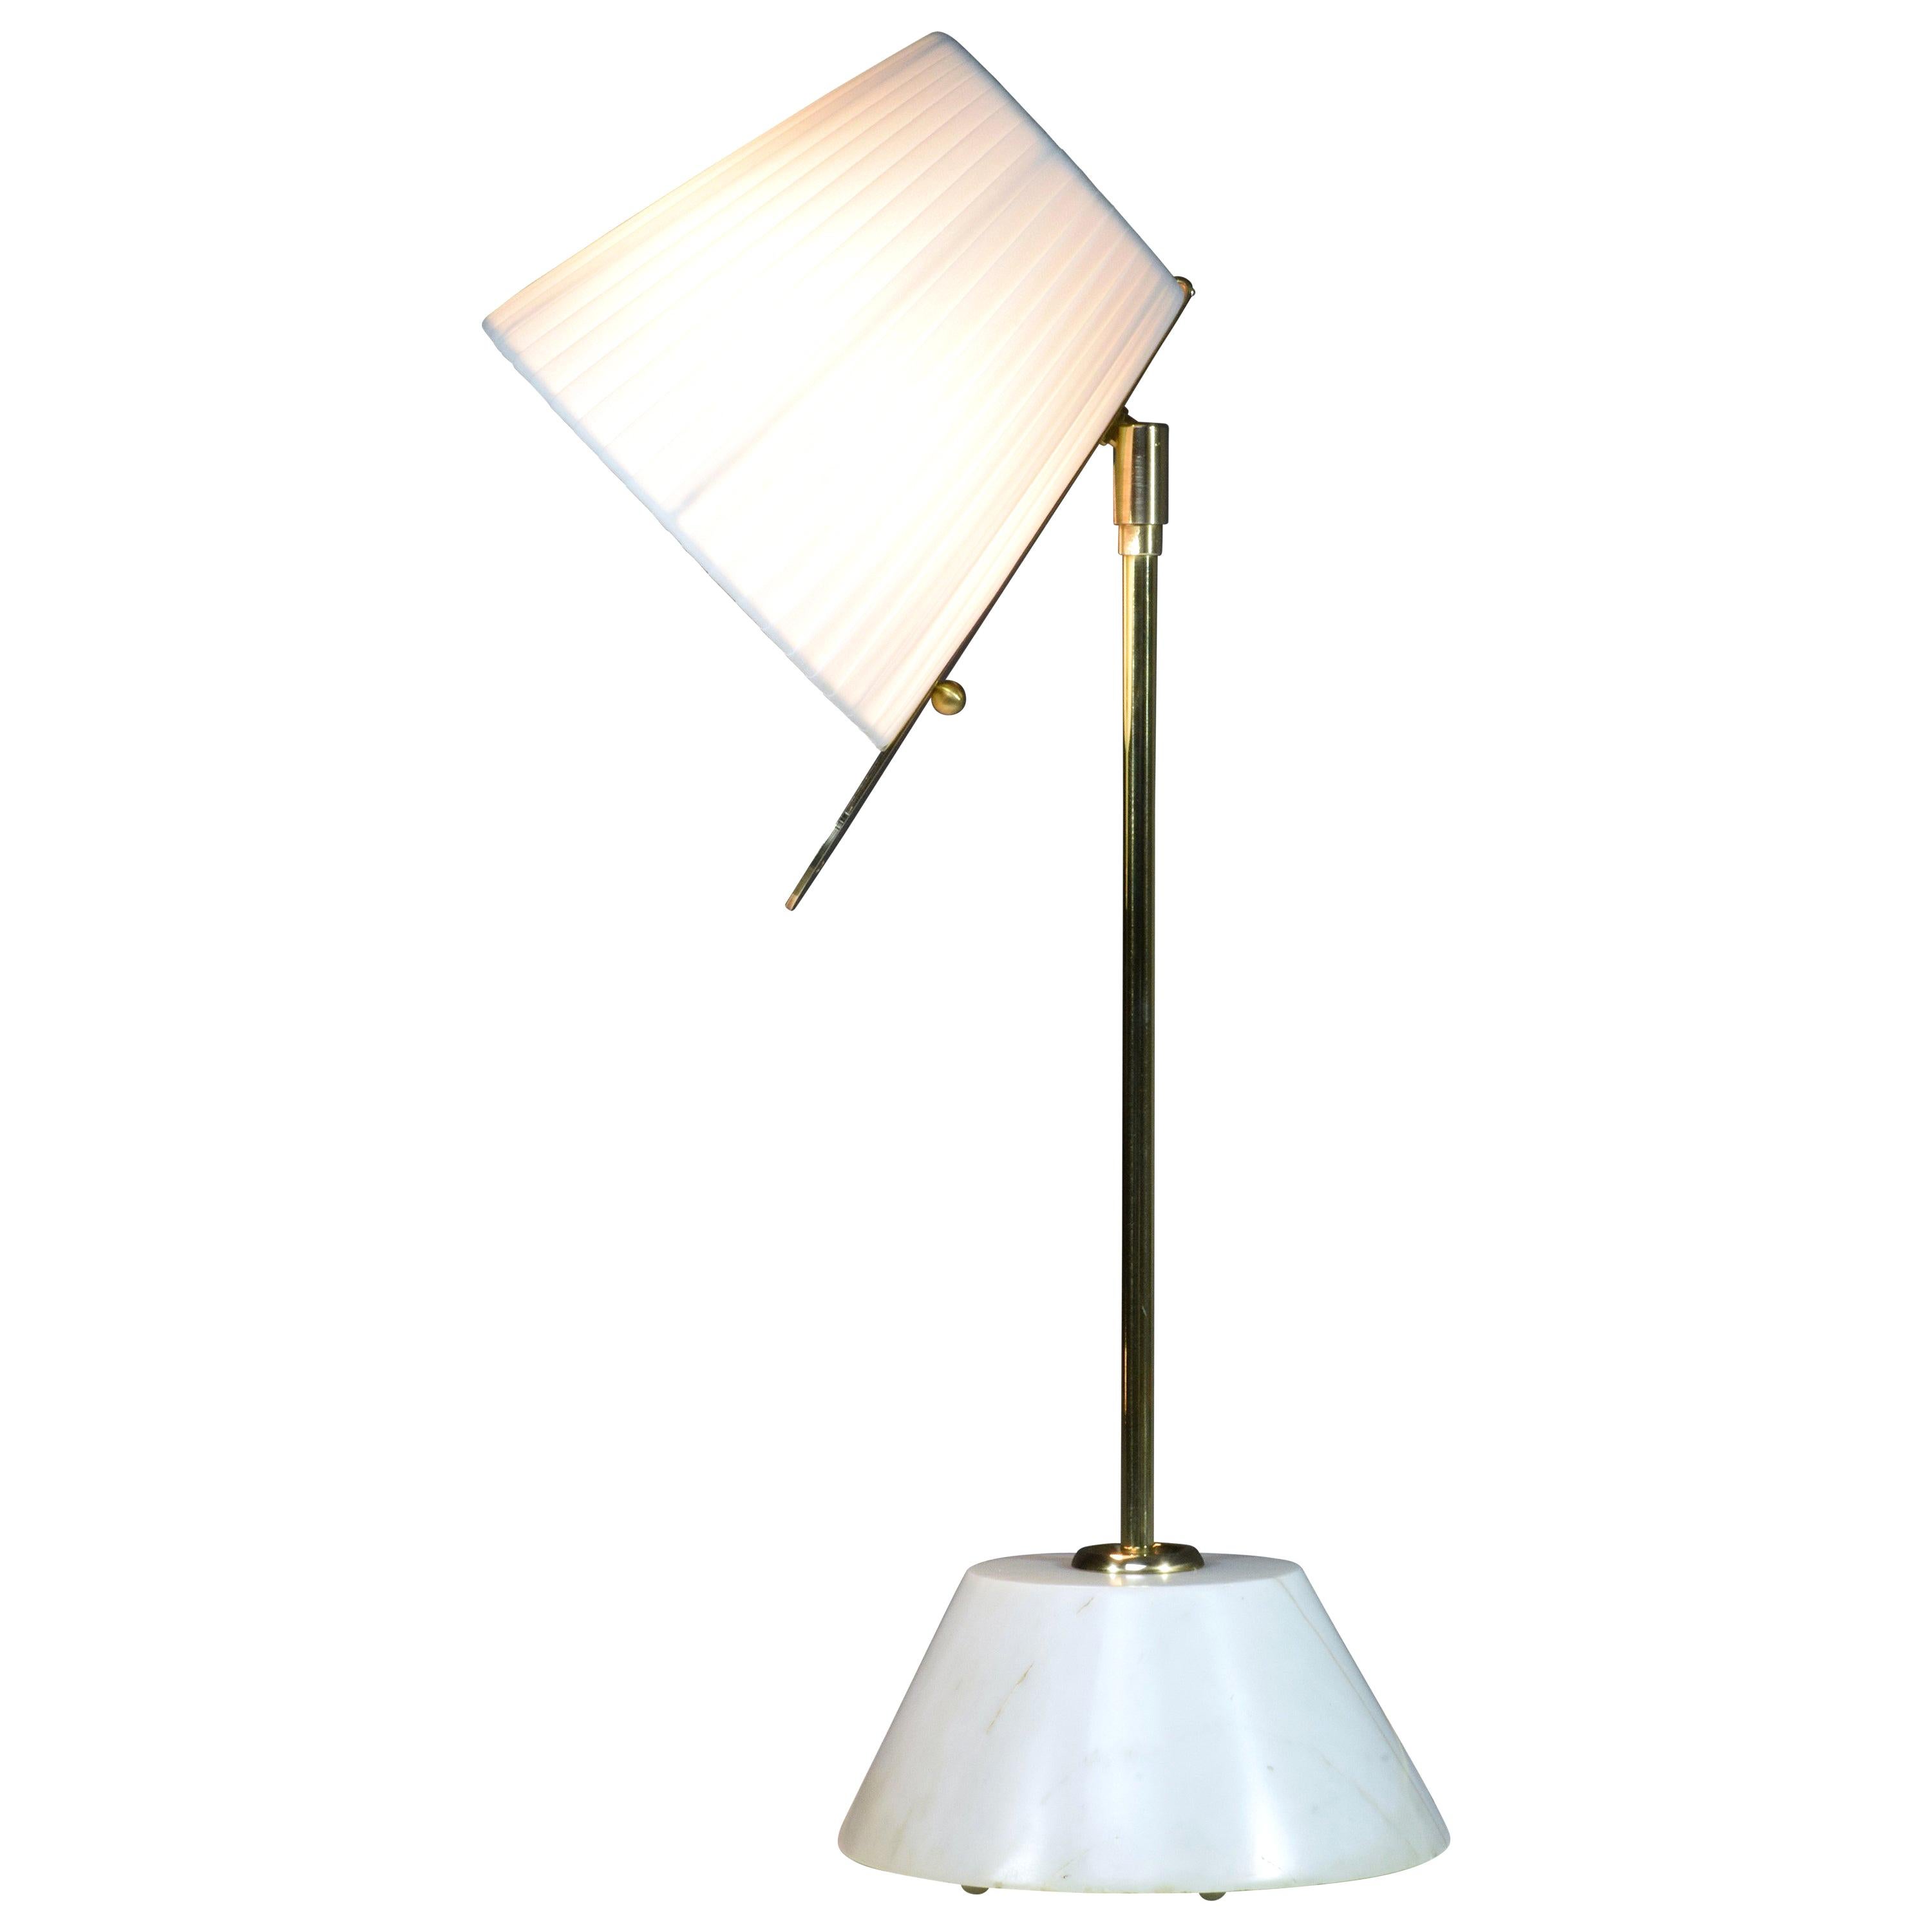 Evolution-III Contemporary Brass Table Lamp, Flow Collection